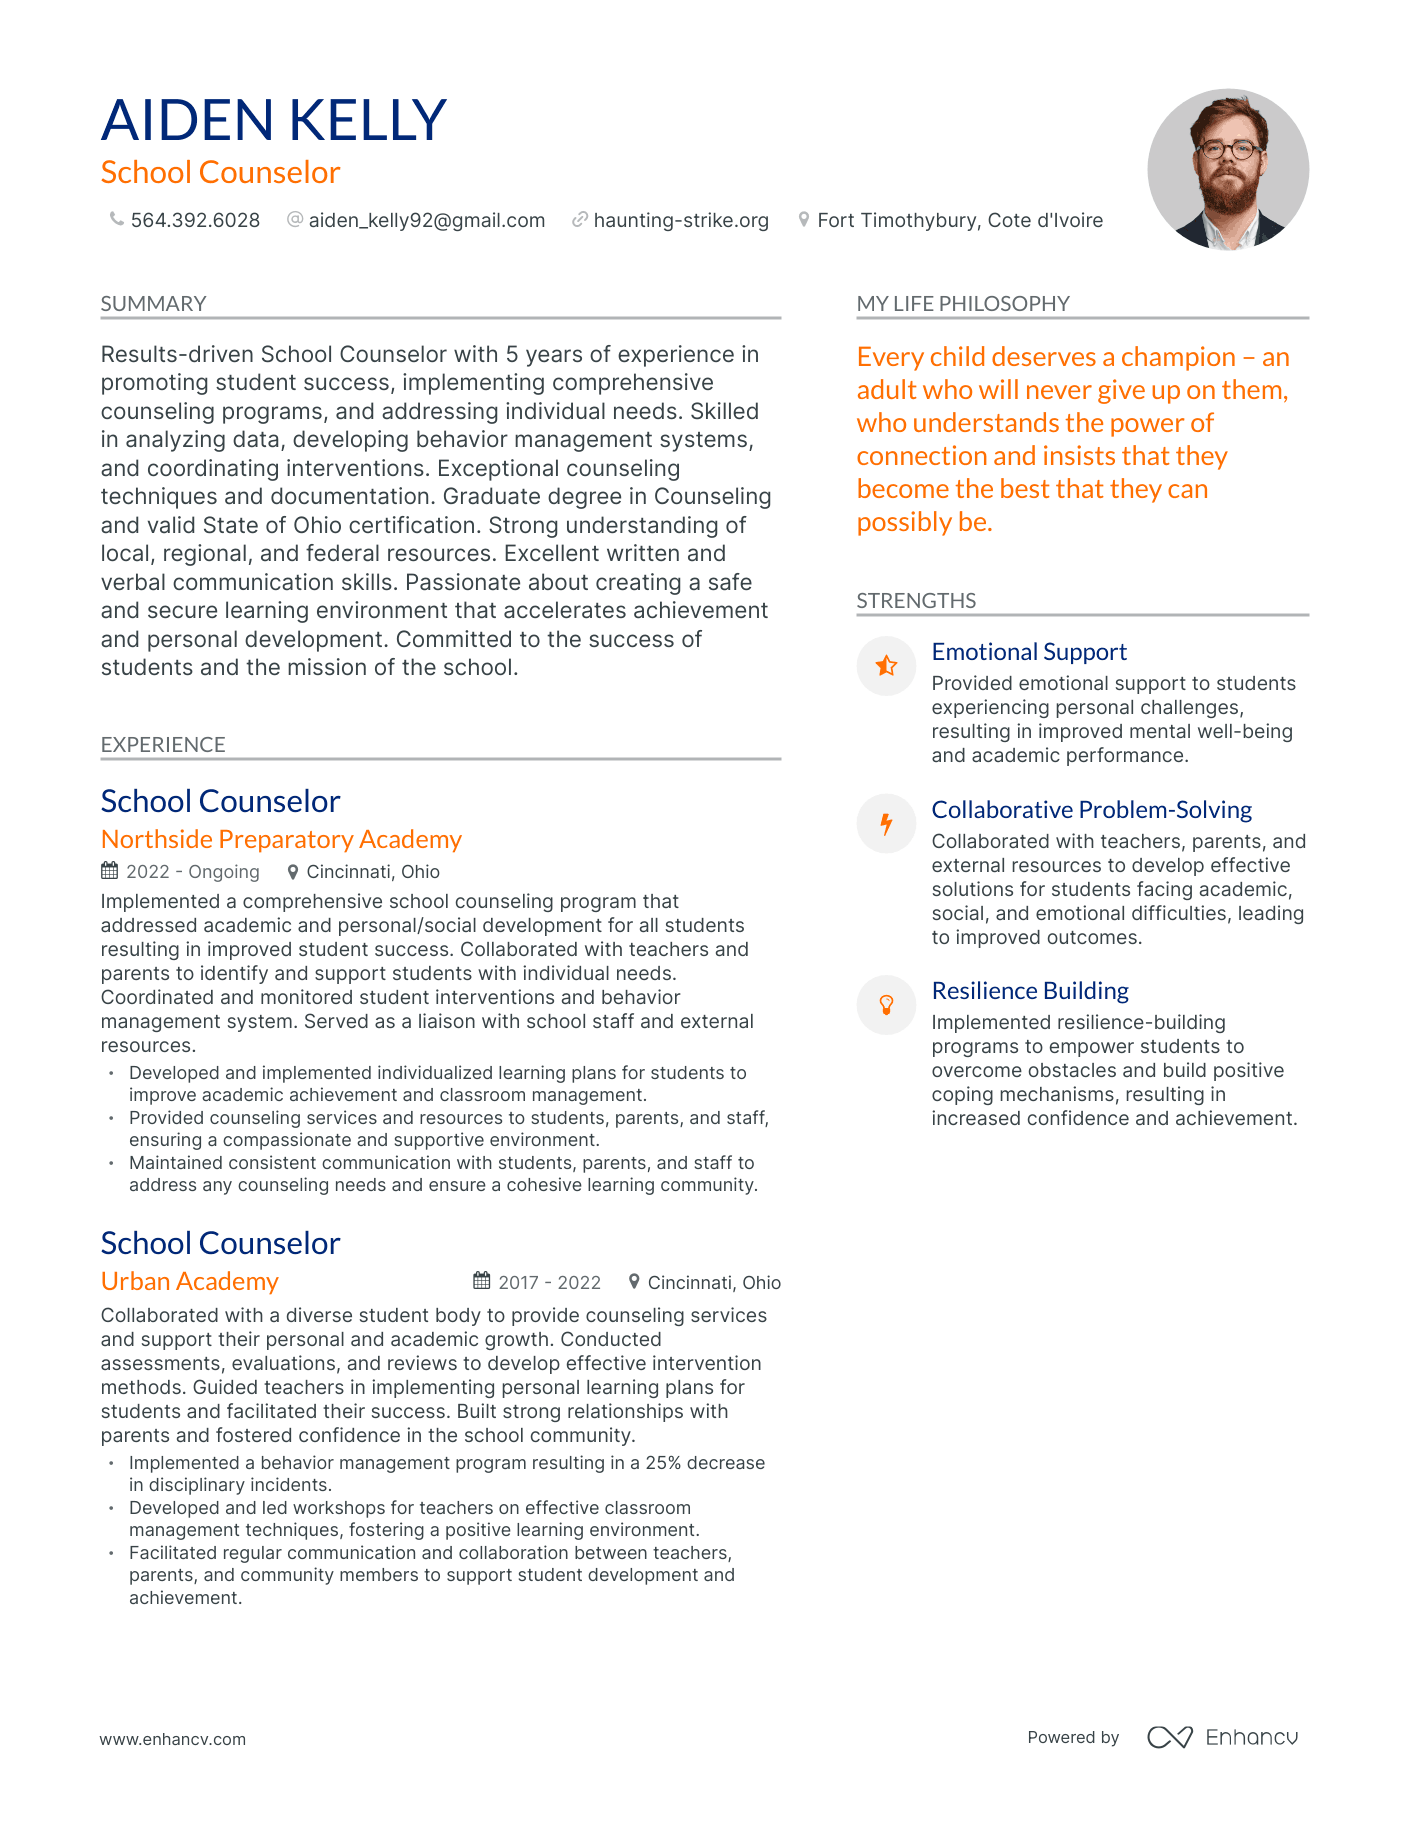 School Counselor resume example